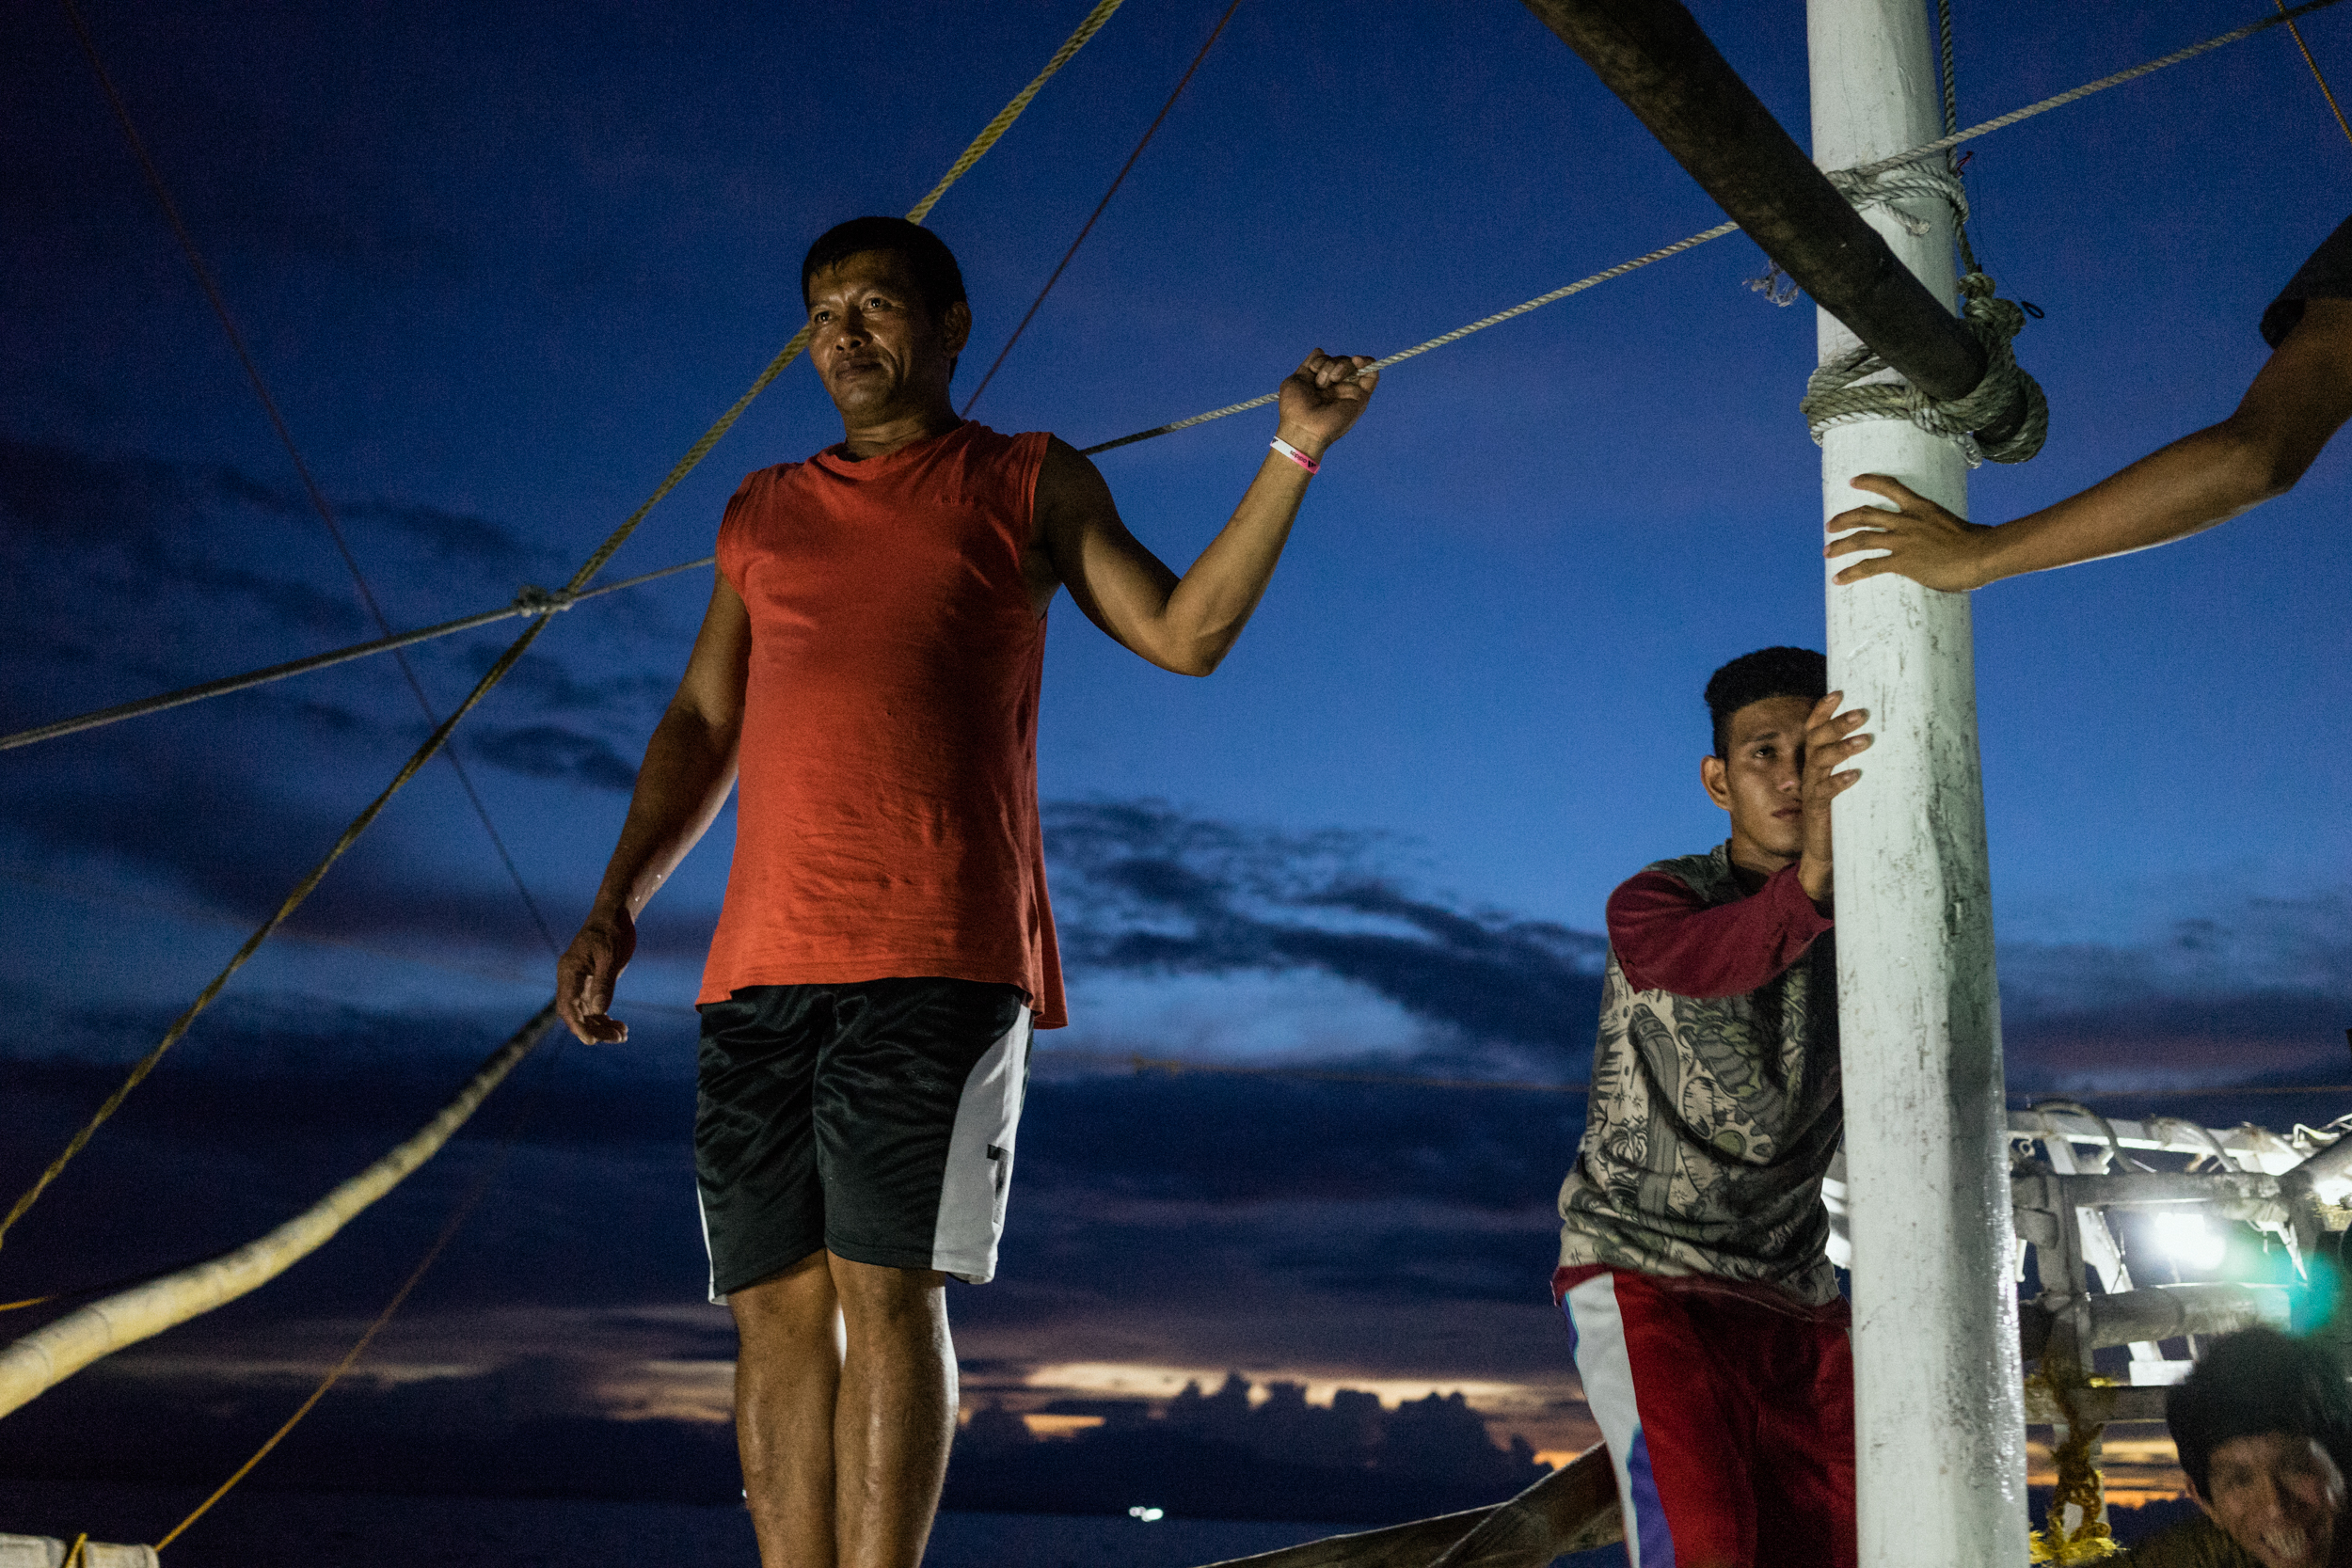  Kalibo, Philippines - September 21, 2015: The captain of a local fishing boat is seen at work. Members of the crew, who make approximately 35 USD per month, have expressed their desire to work on a larger fishing vessel for the promise of a higher i